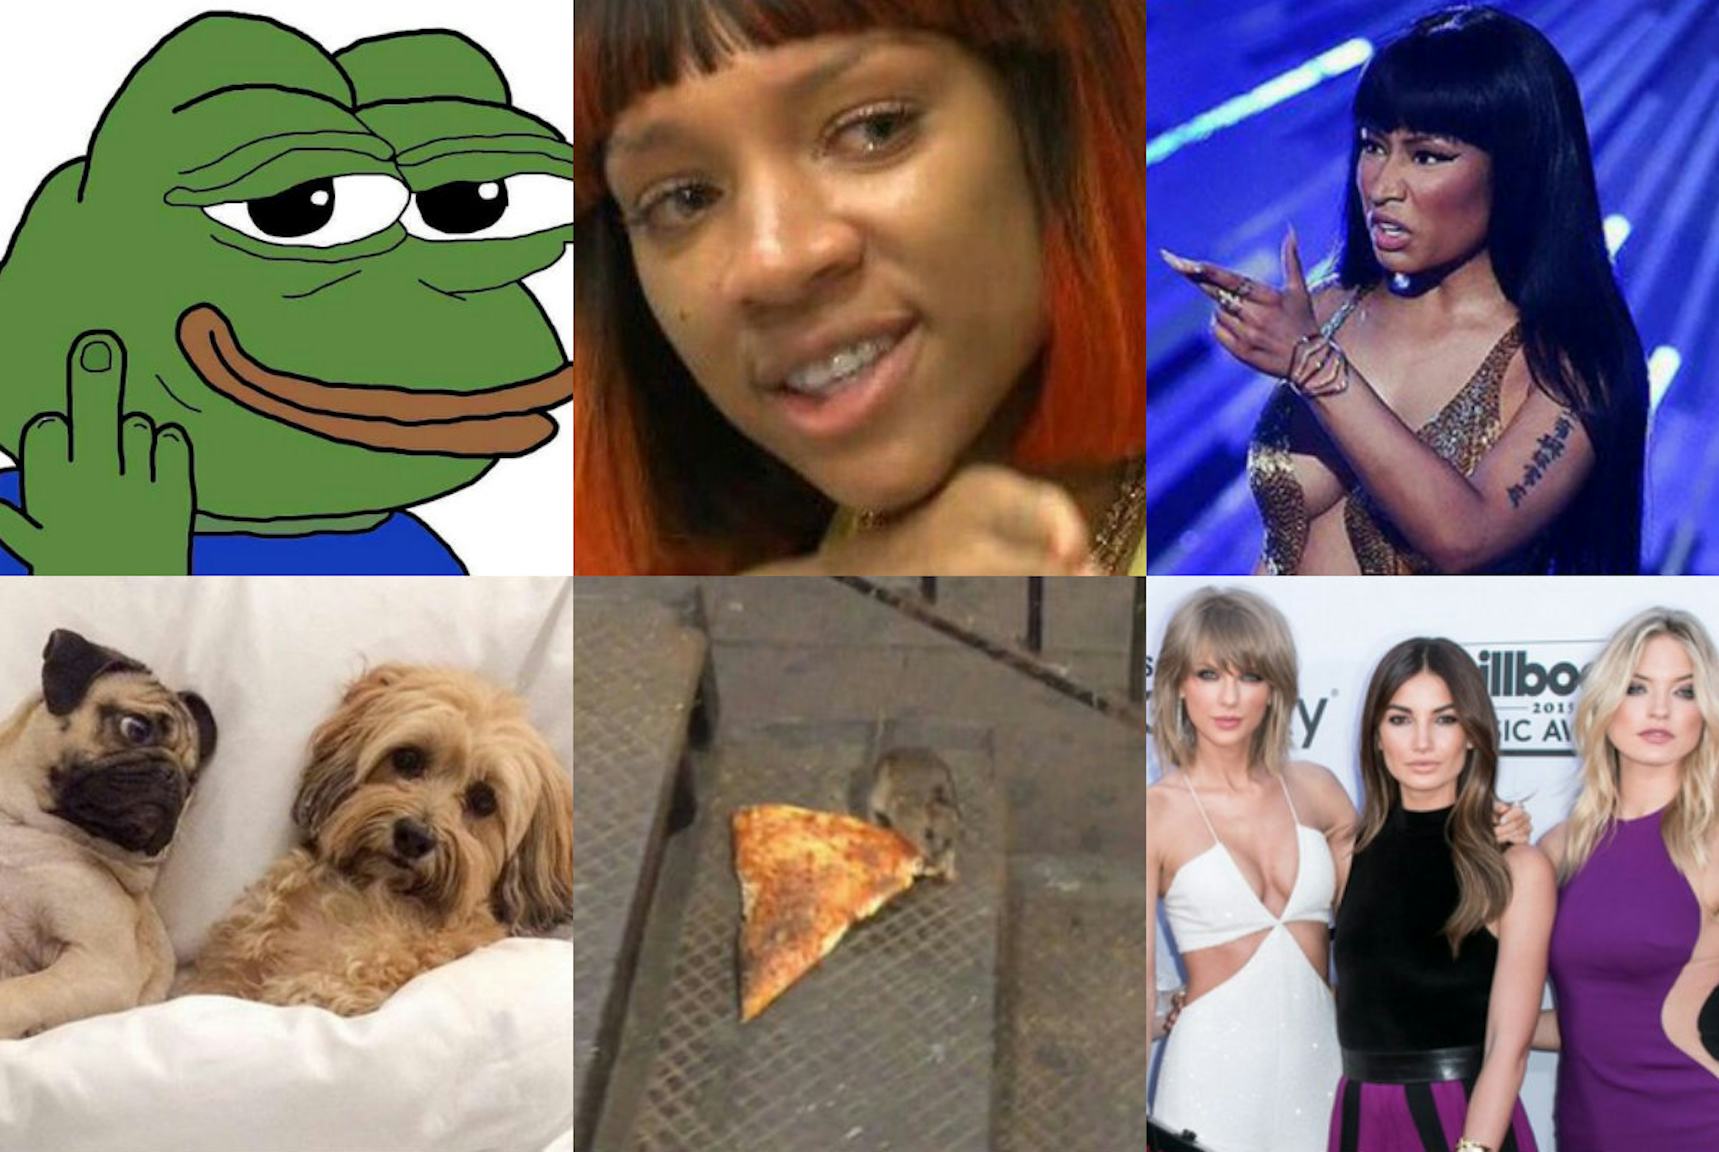 13 Of The Funniest Internet Memes Of 2015